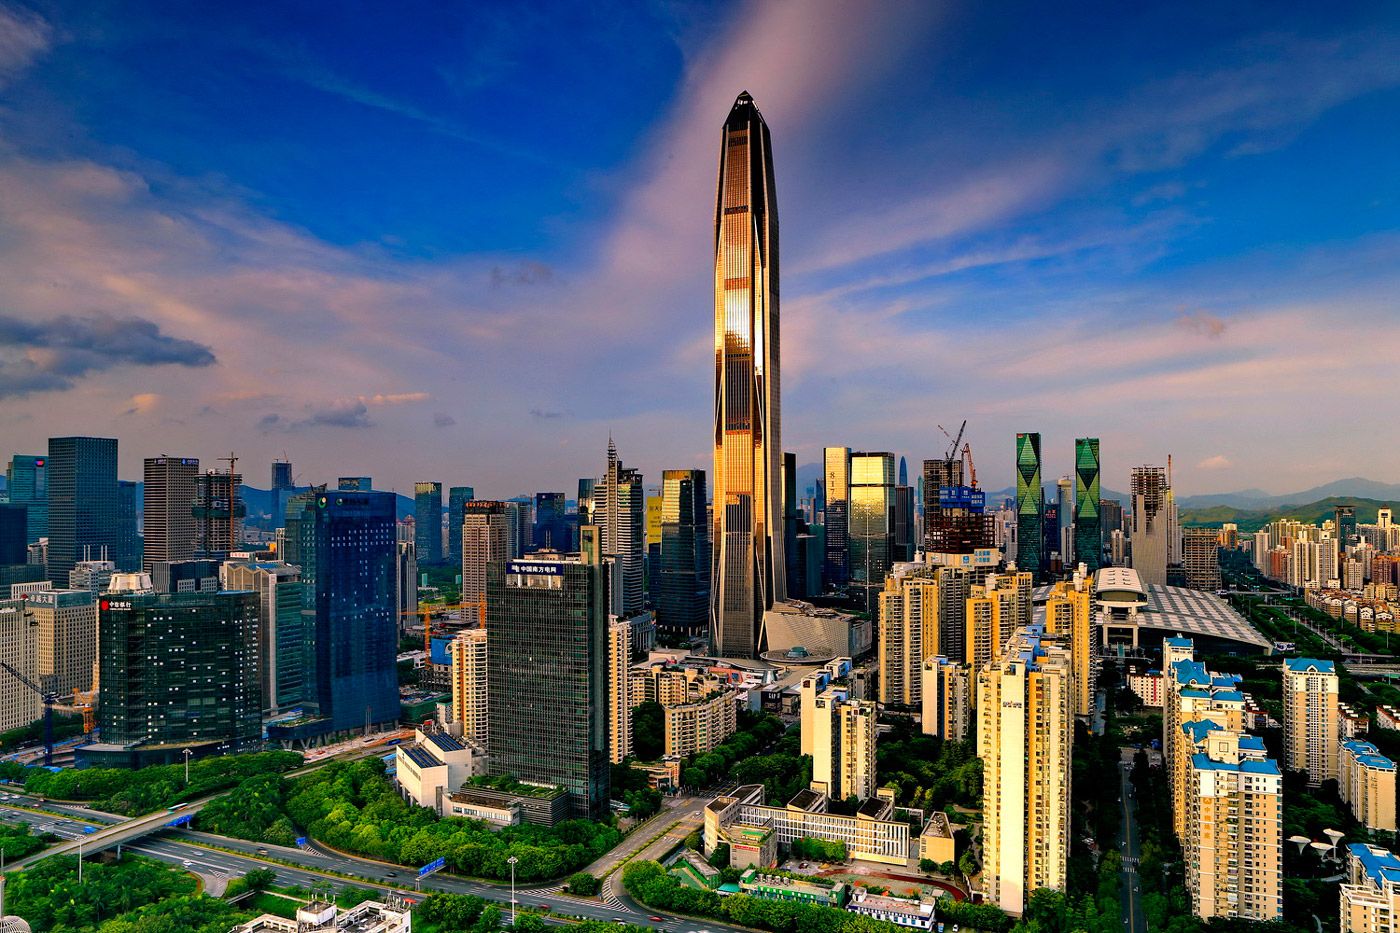 Ping An IFC Was Almost the Tallest Building in China